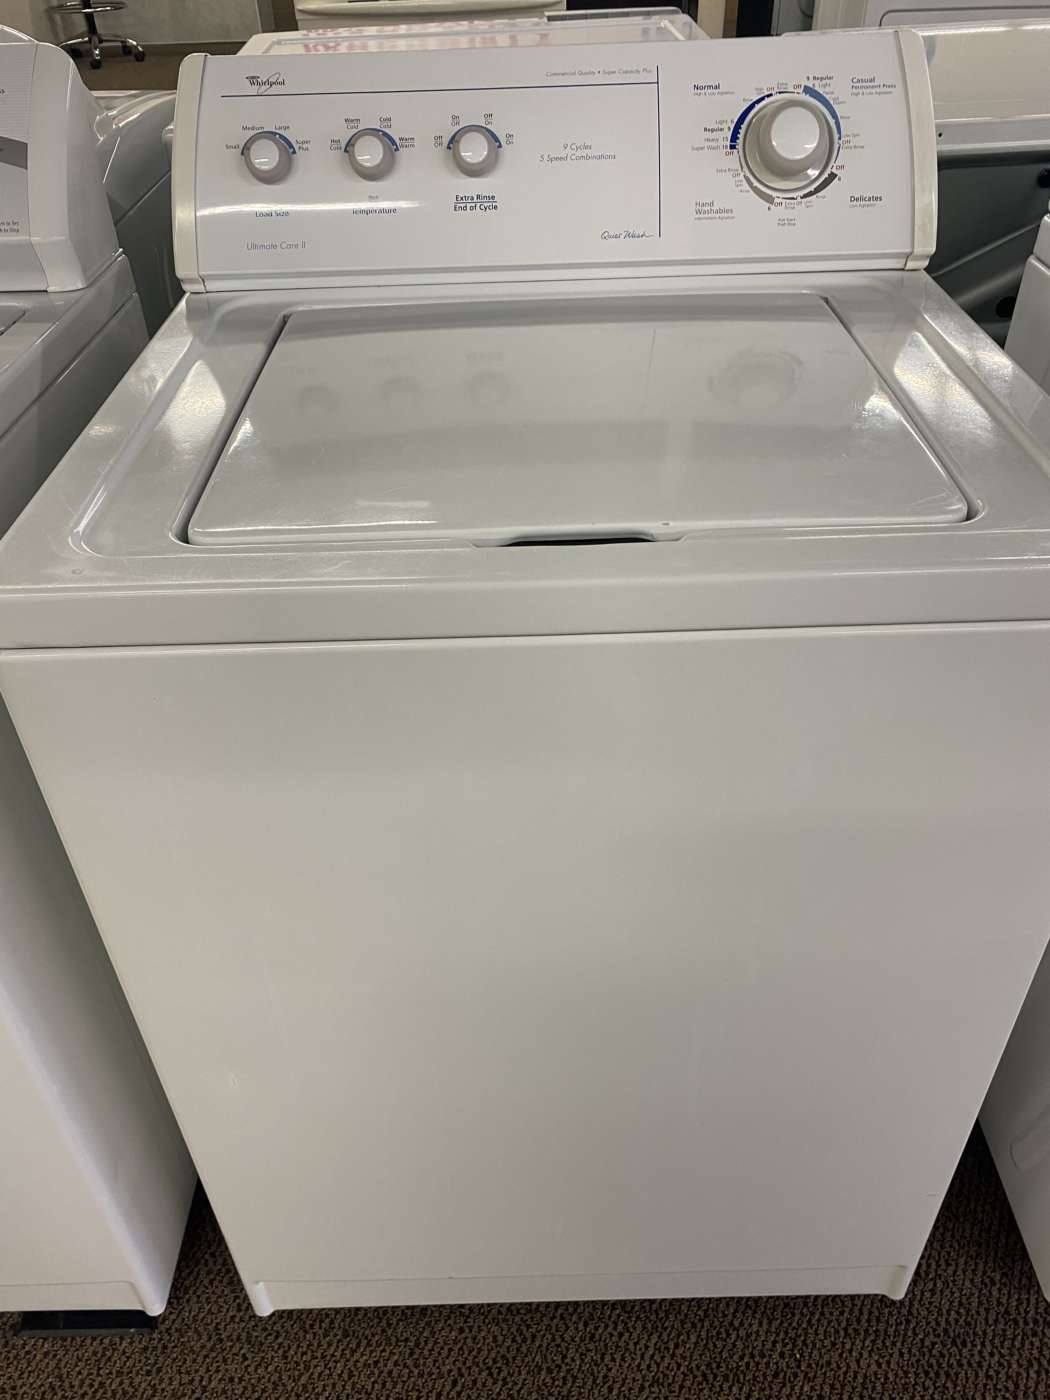 Reconditioned WHIRLPOOL 3.5 Cu. Ft. Top-Load Washer – White